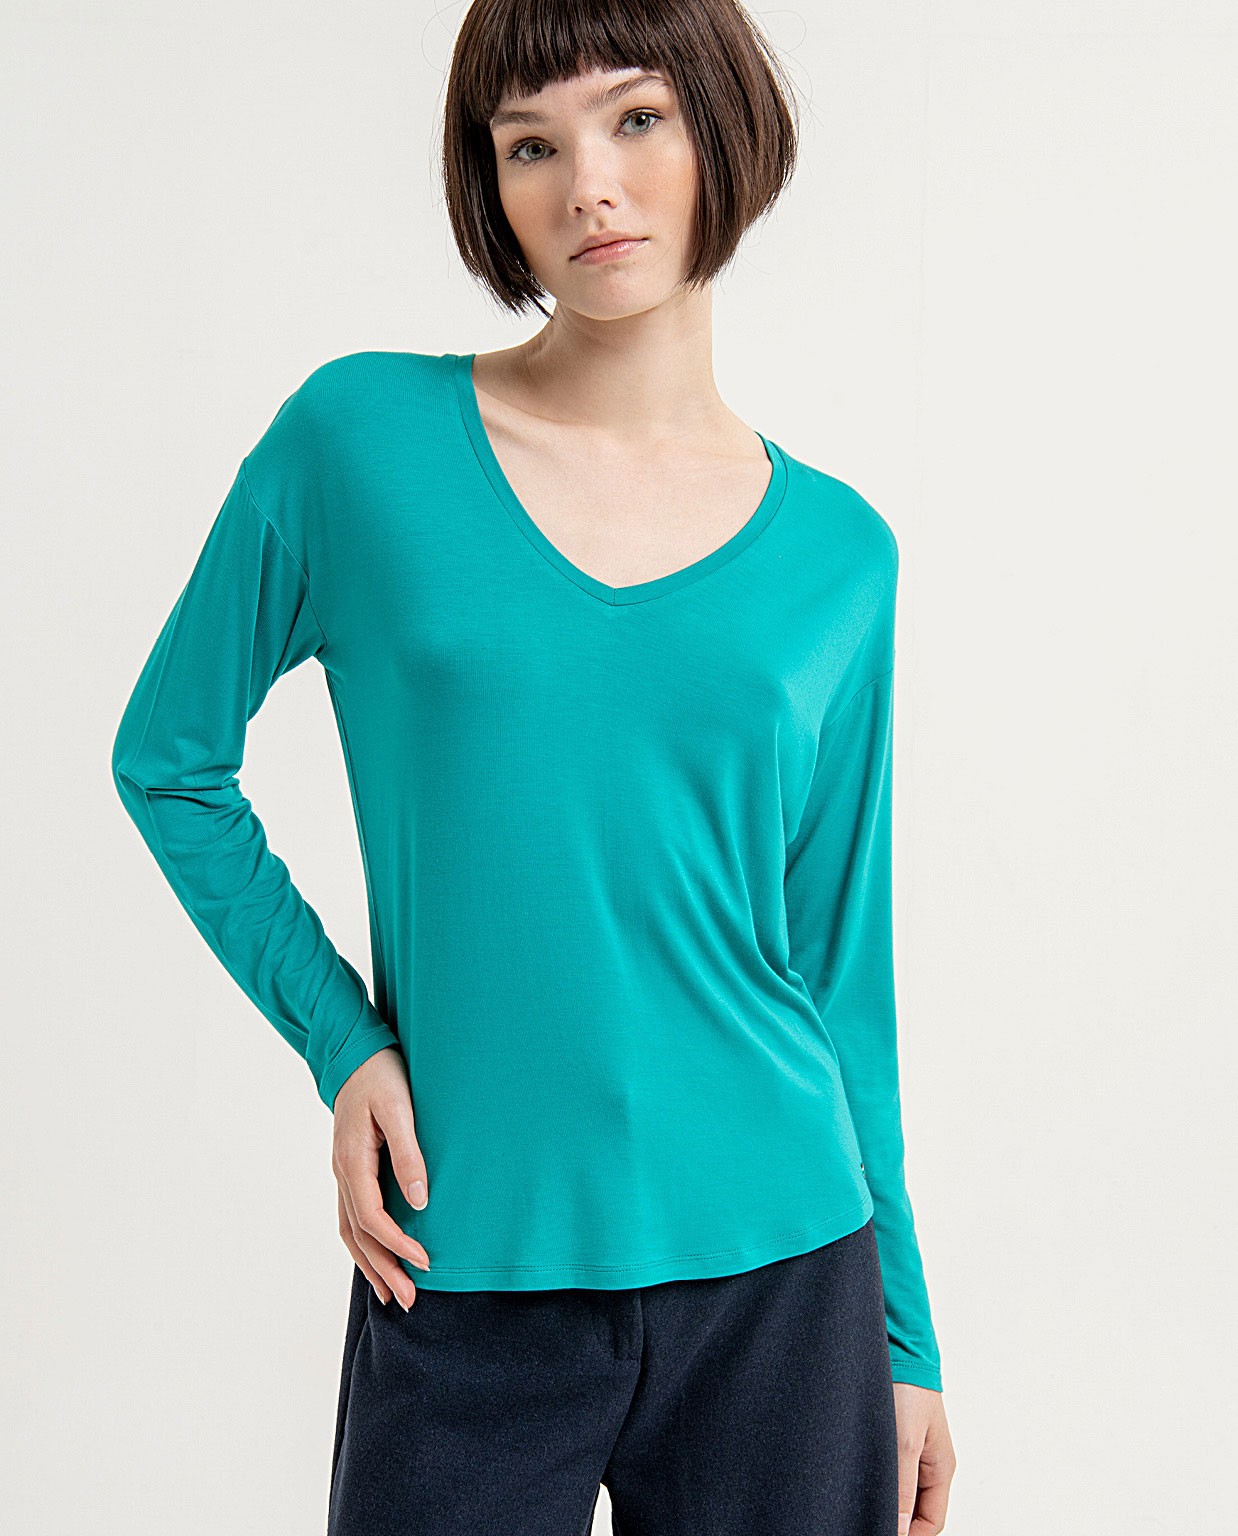 Stretchy and plain V-neck wide t-shirt Turquoise